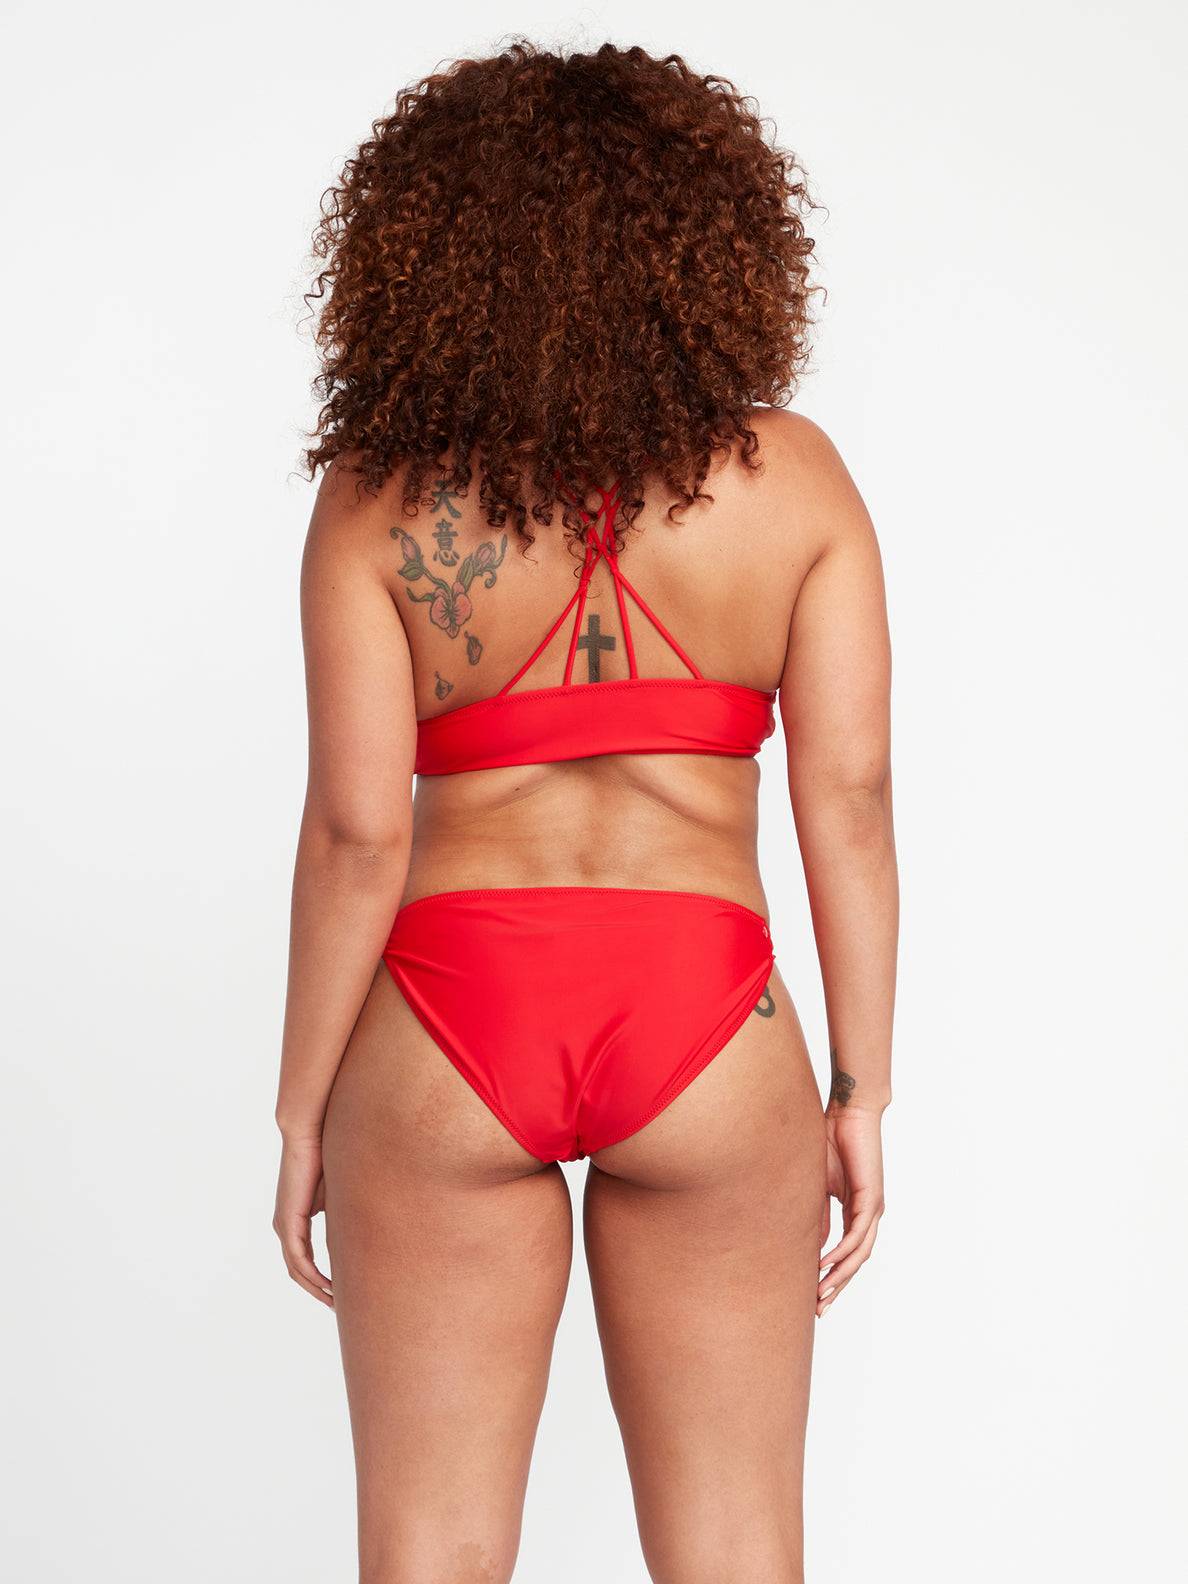 Simply Solid Full Bikini Bottoms - Candy Apple